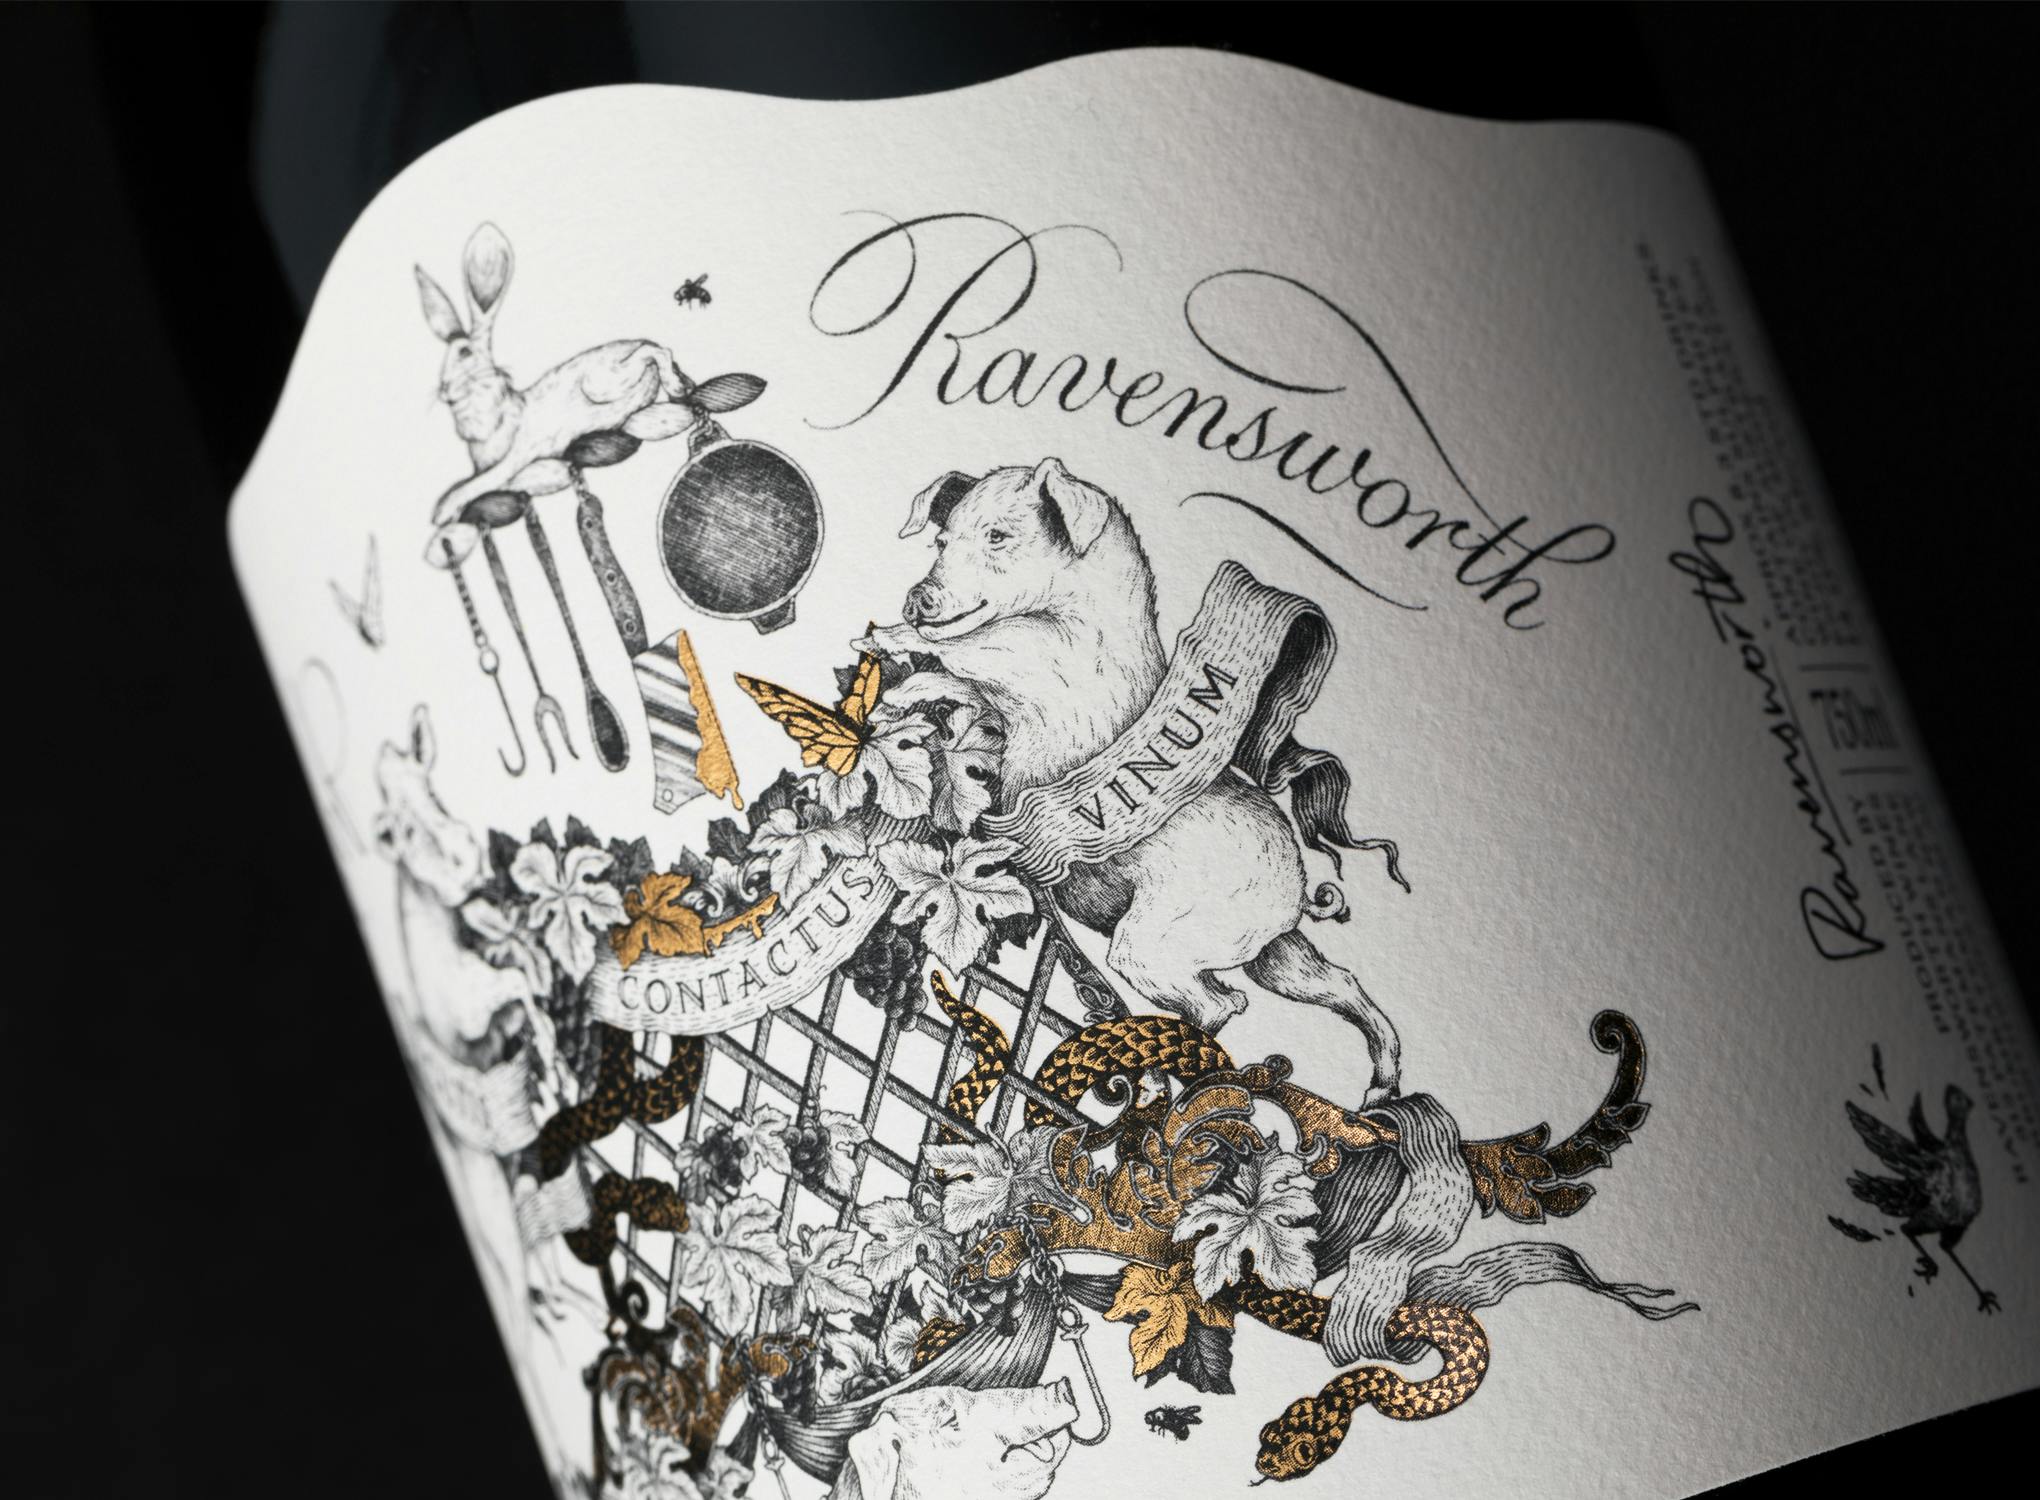 Picture of the Ravensworth wine label